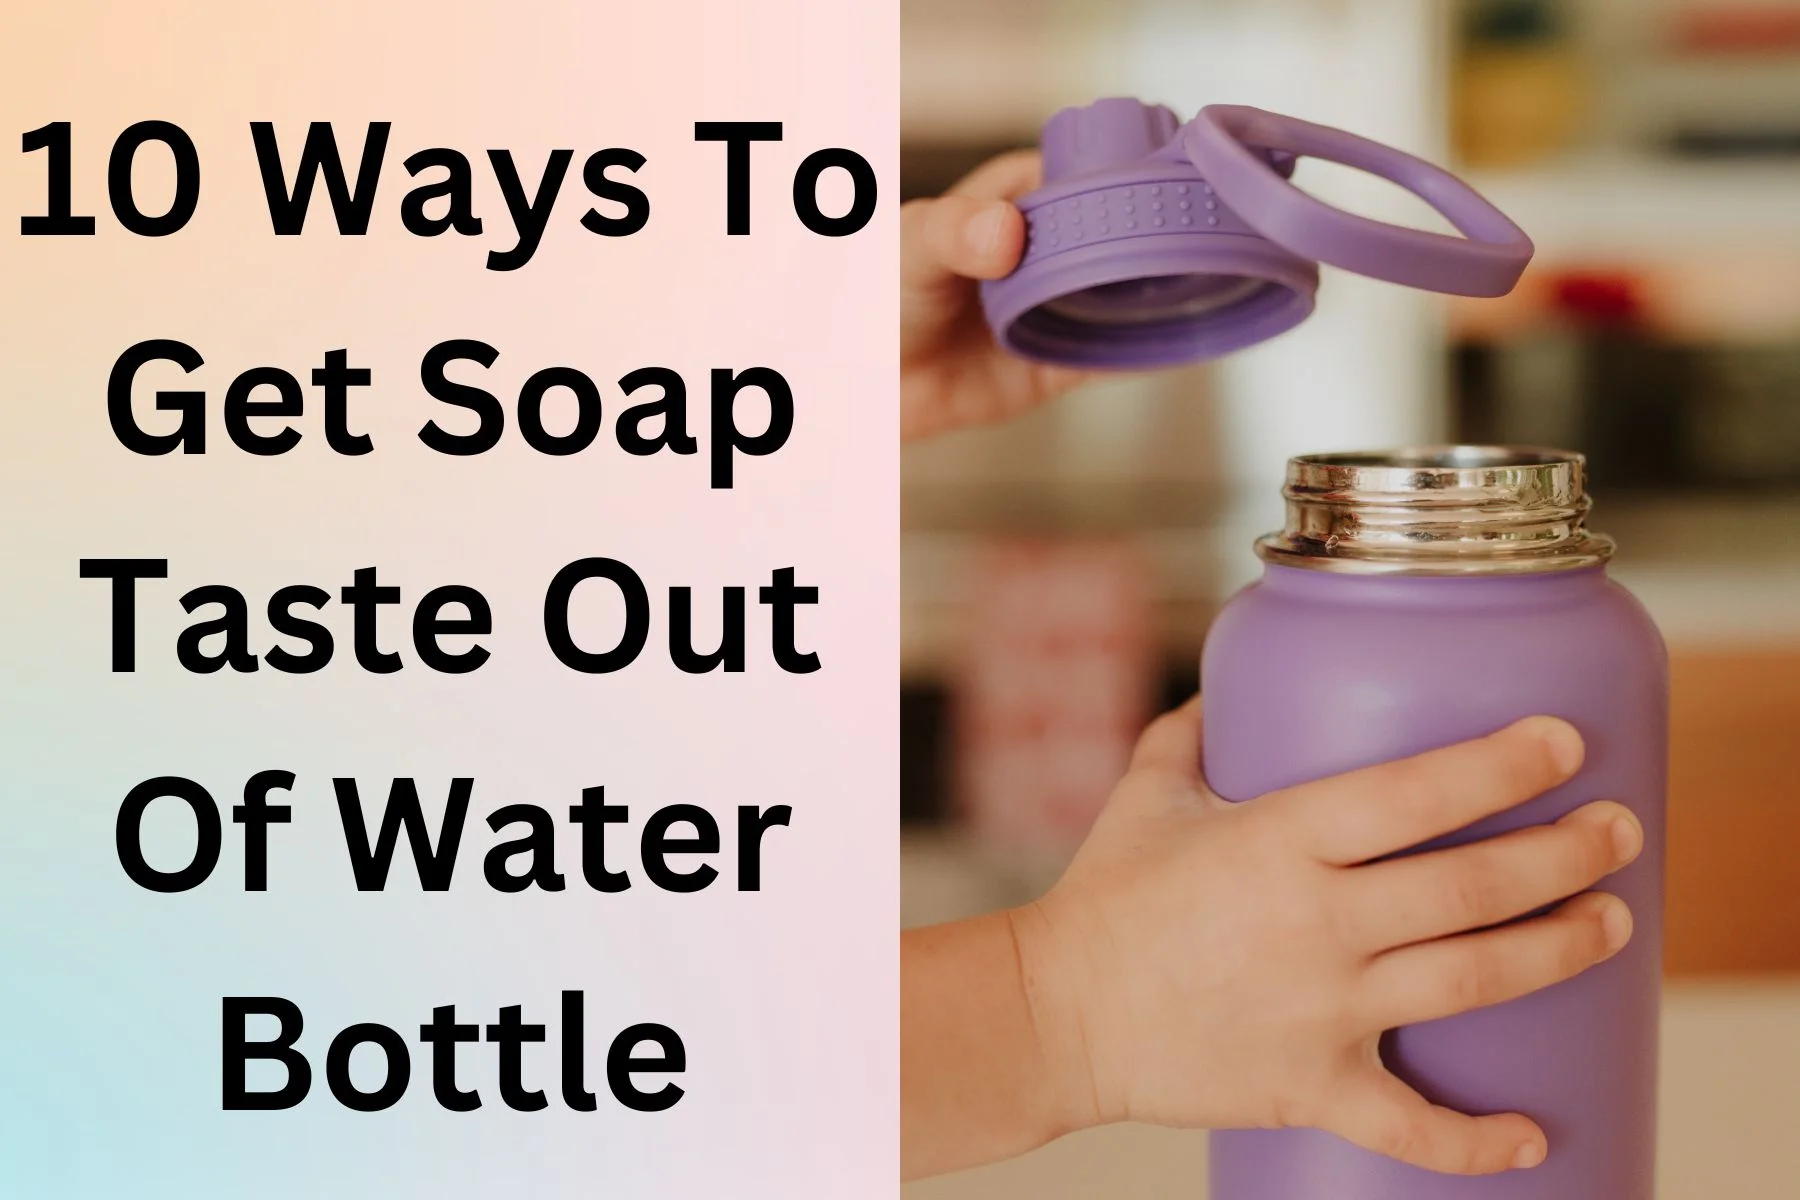 how to get soap taste out of water bottle